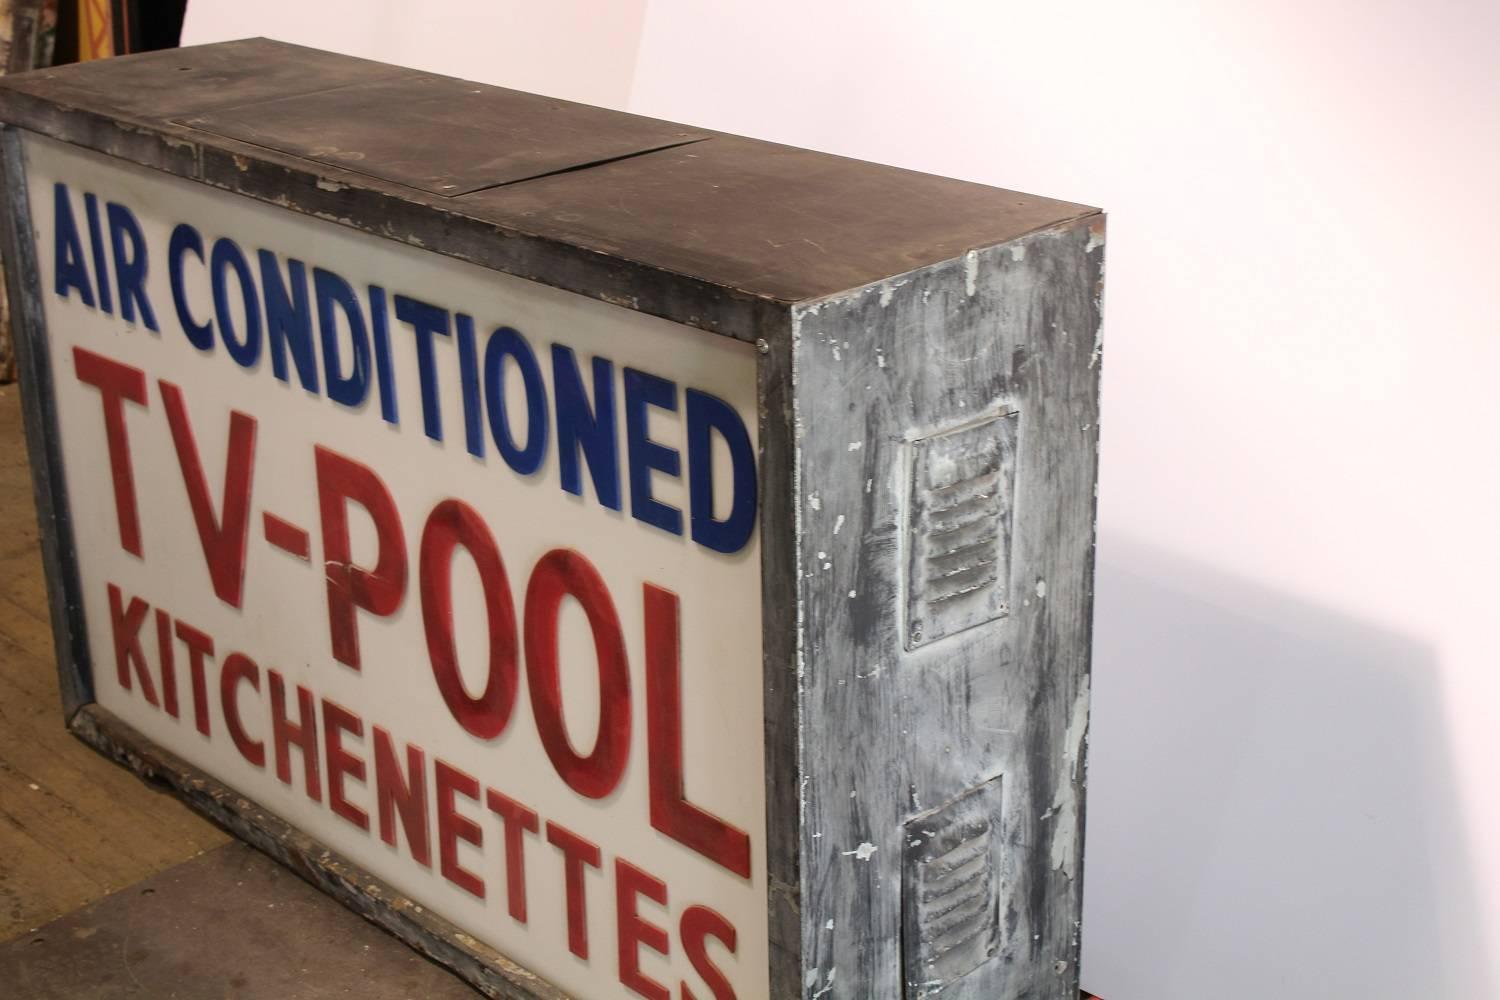 1950s double sided light up TV-POOL sign.